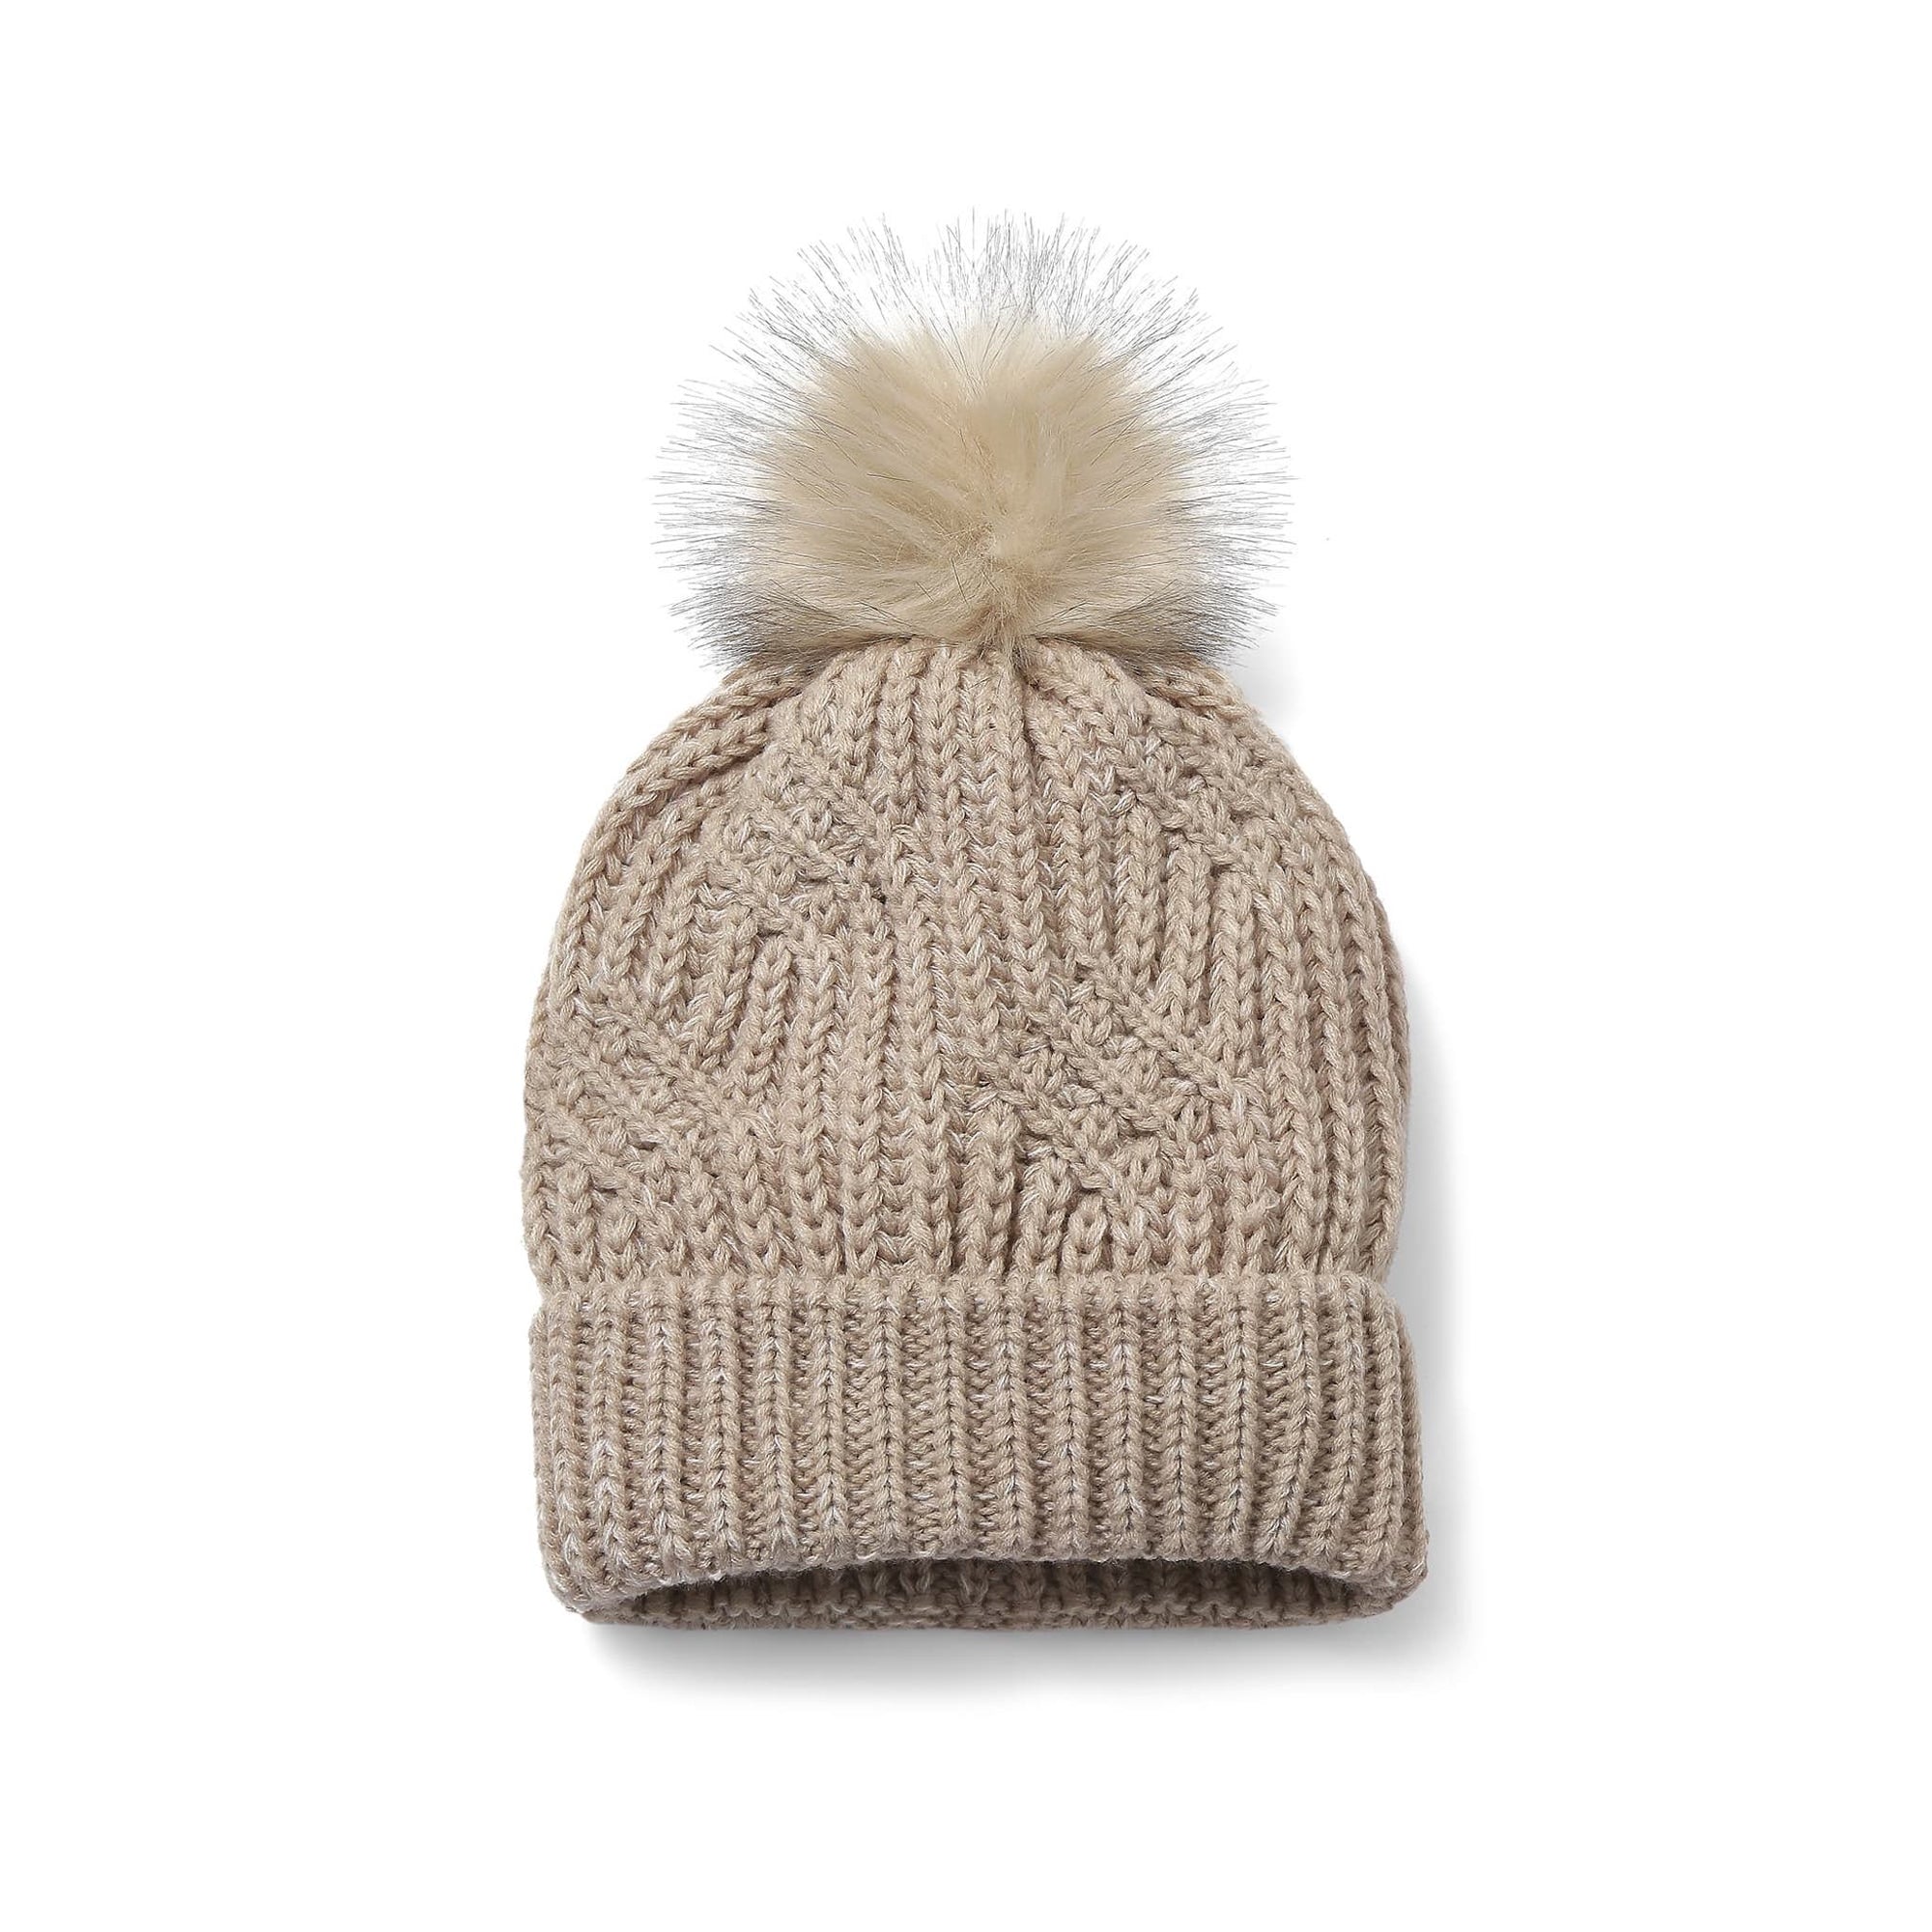 Only Curls Satin Lined Knitted Beanie Hat - Sand Melange with Pom Pom - Only Curls